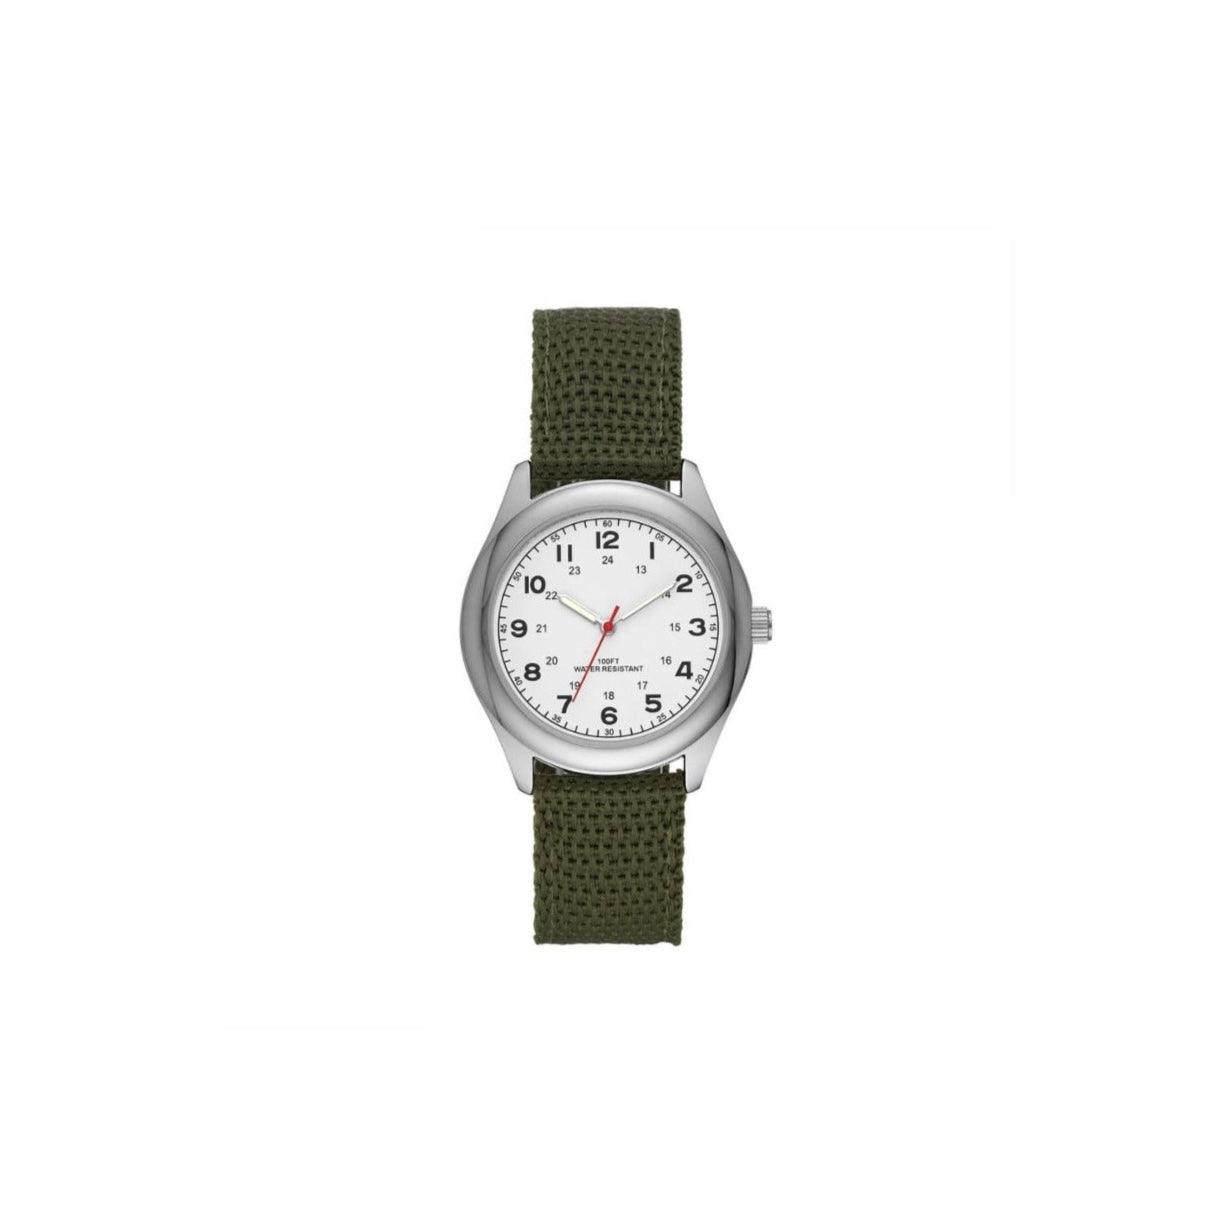 George Silvertone Olive Nylon Strap Watch With White Dial (191999211)